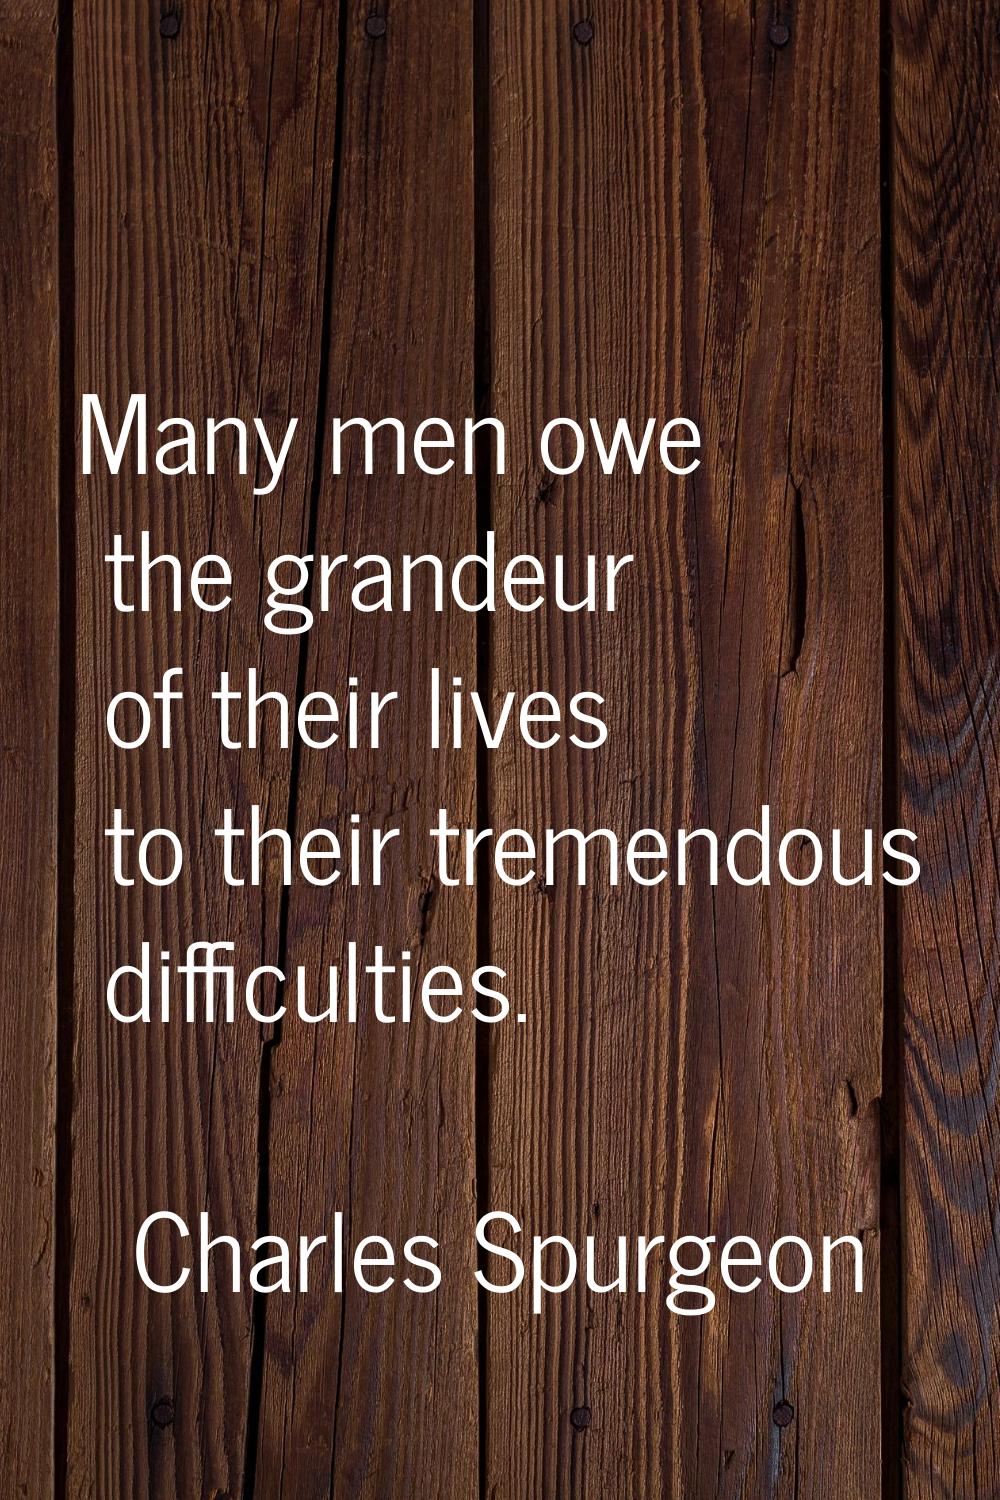 Many men owe the grandeur of their lives to their tremendous difficulties.